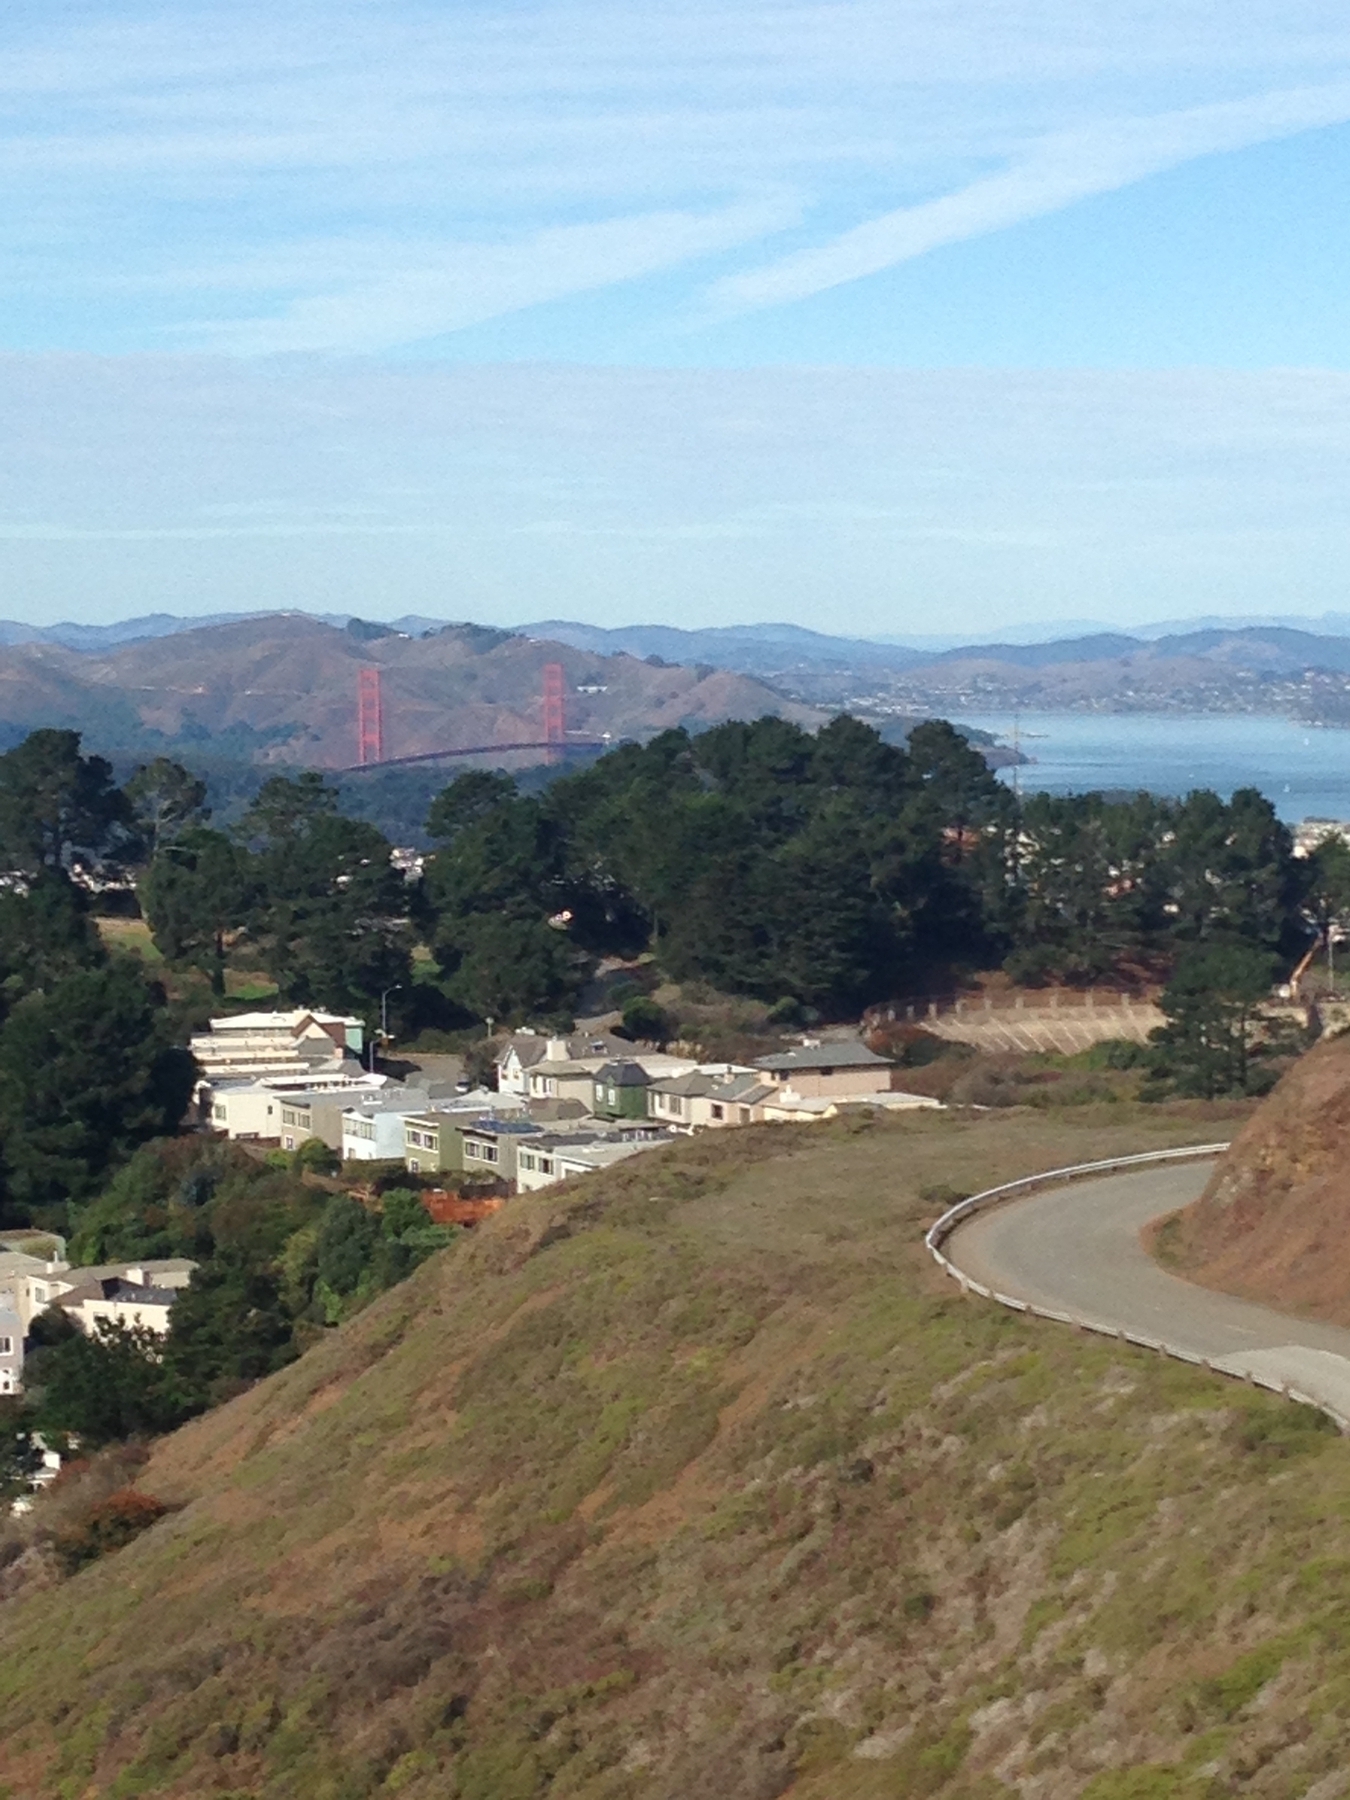 A strip of road on the left, the ocean in the background together with the Golden Gate Bridge in San Francisco, California 